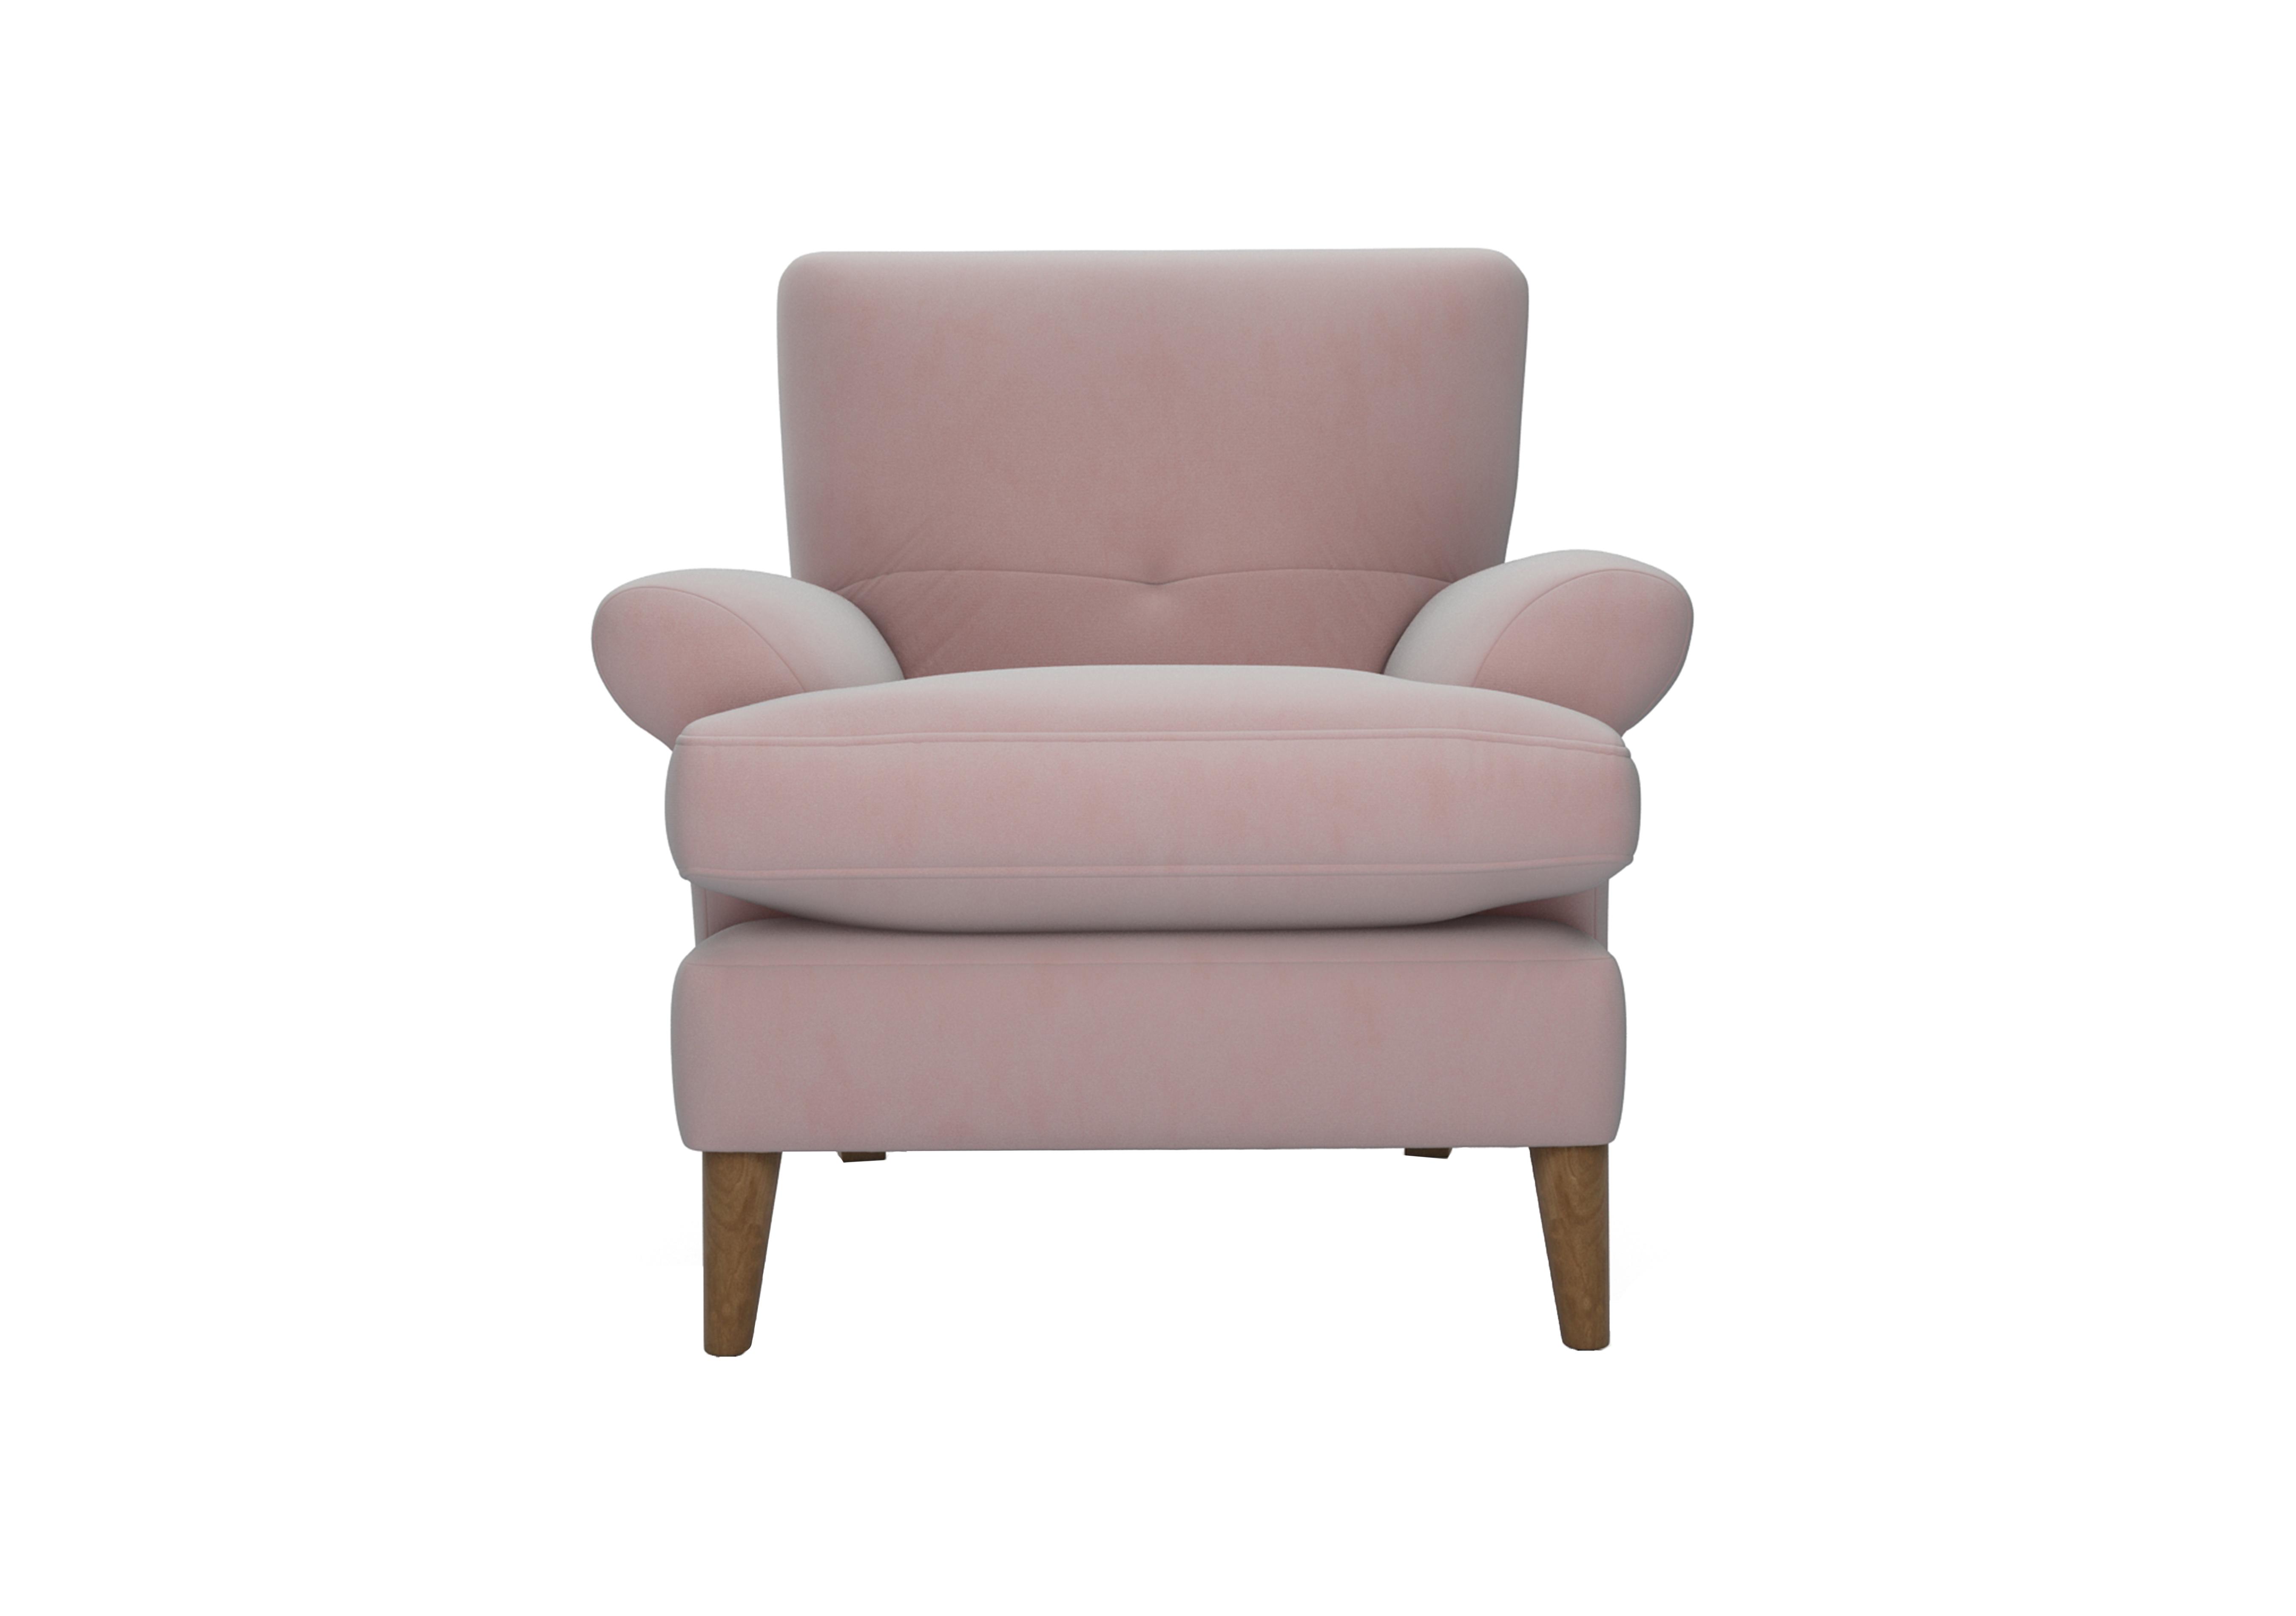 Bronwyn Fabric Joshua Armchair in Cot256 Cotton Candy on Furniture Village